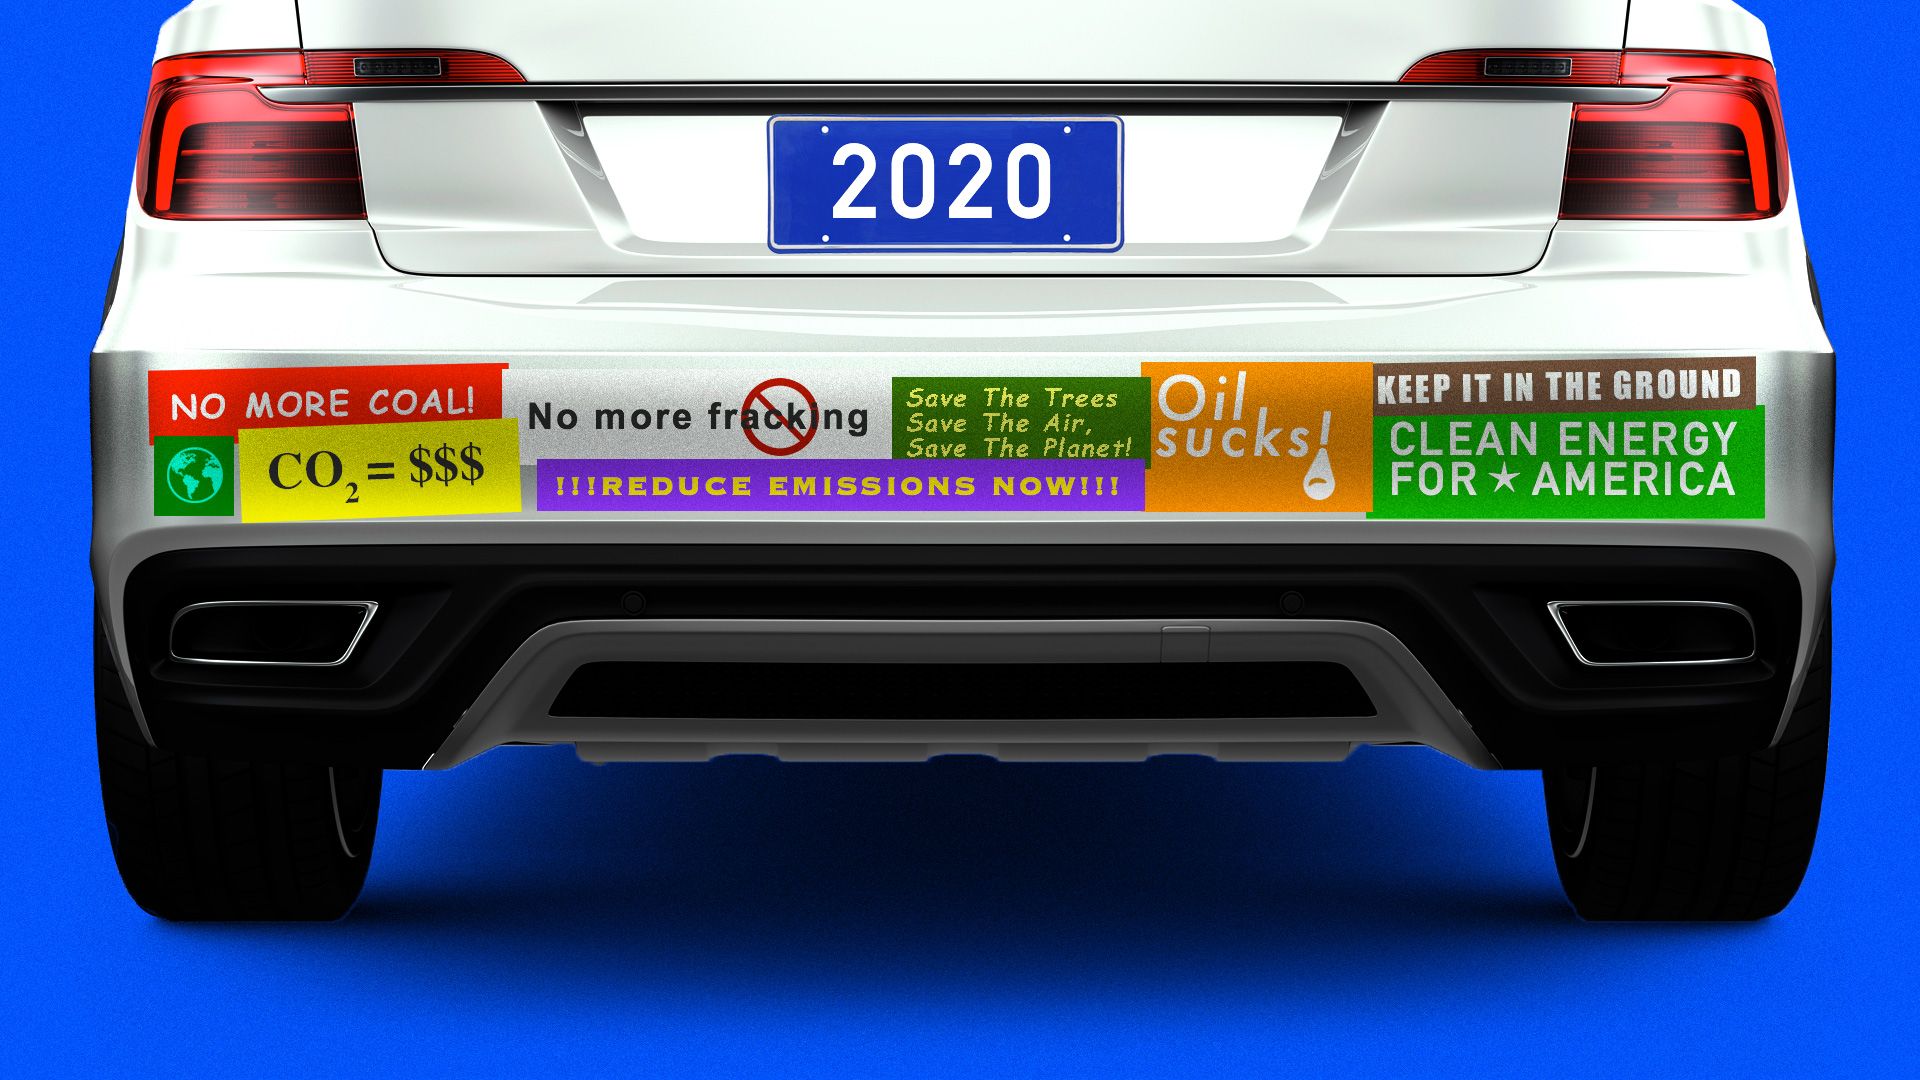 A car overloaded with climate change bumper stickers